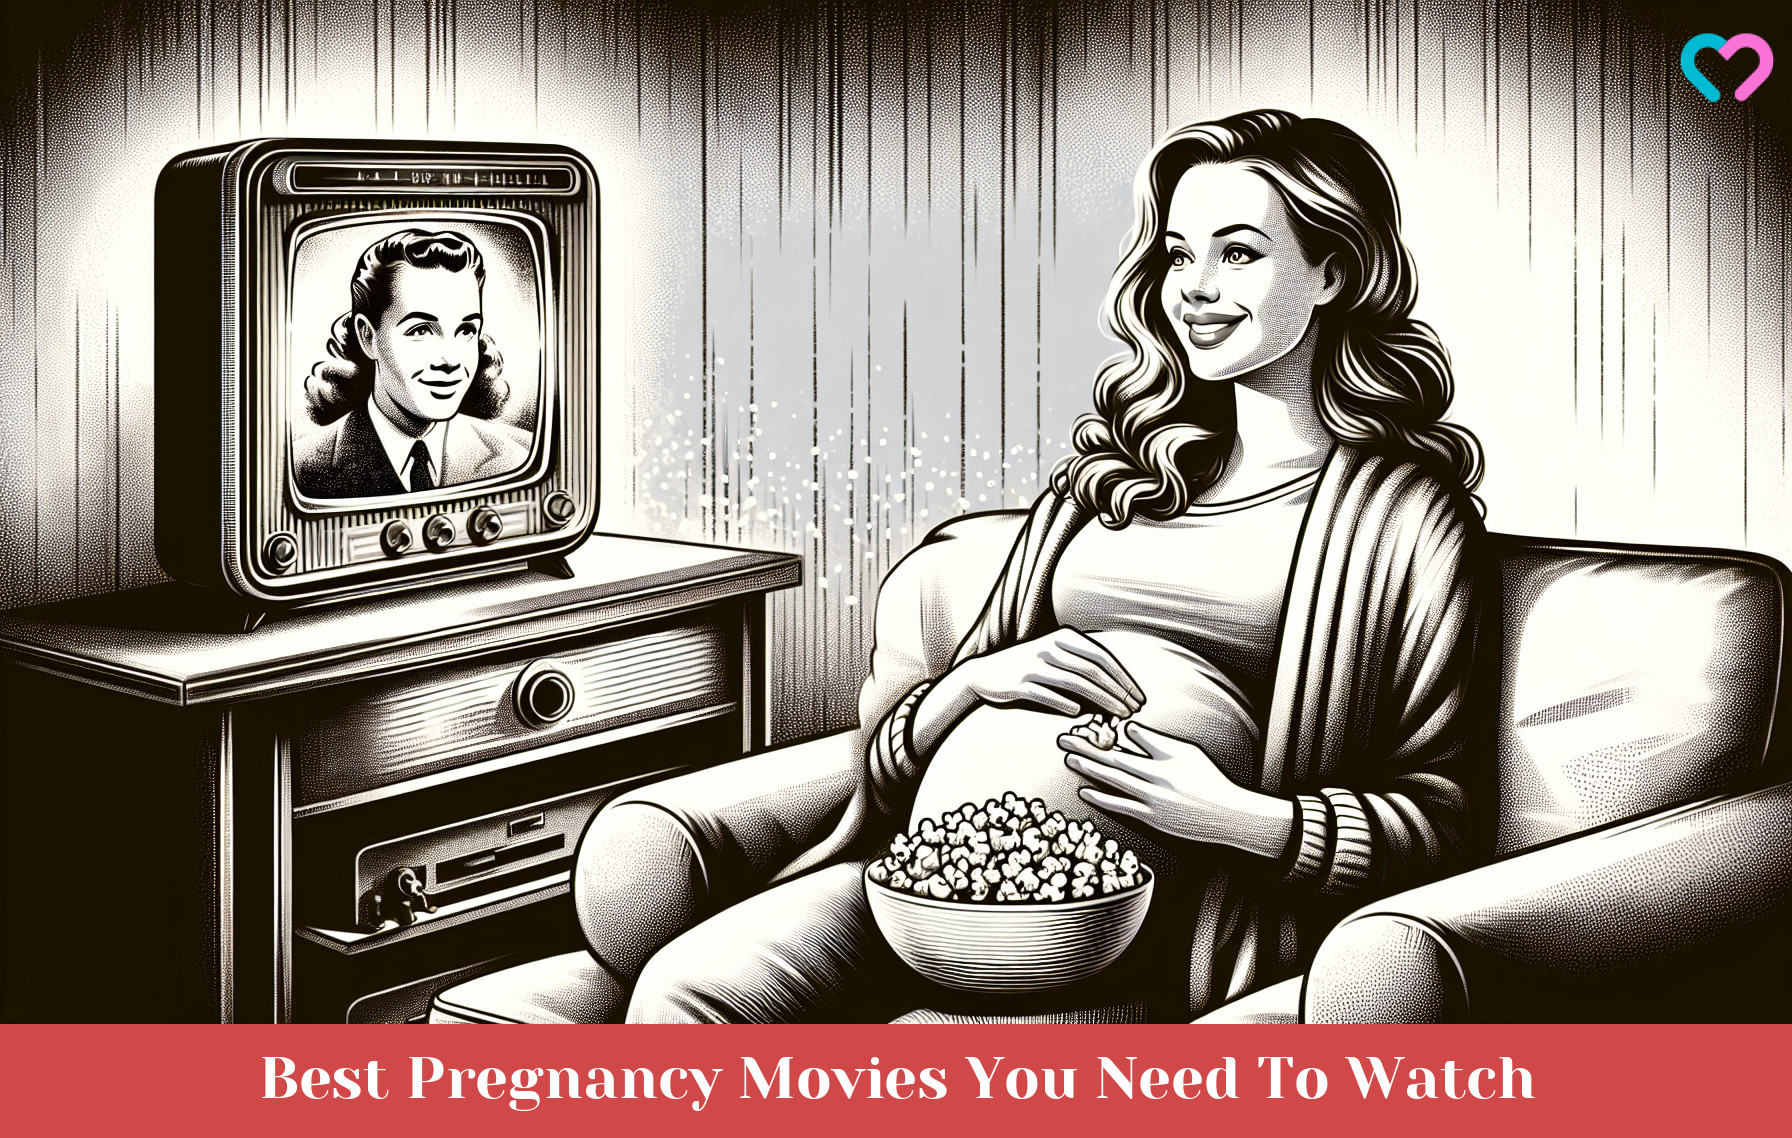 movies to watch during pregnancy_illustration